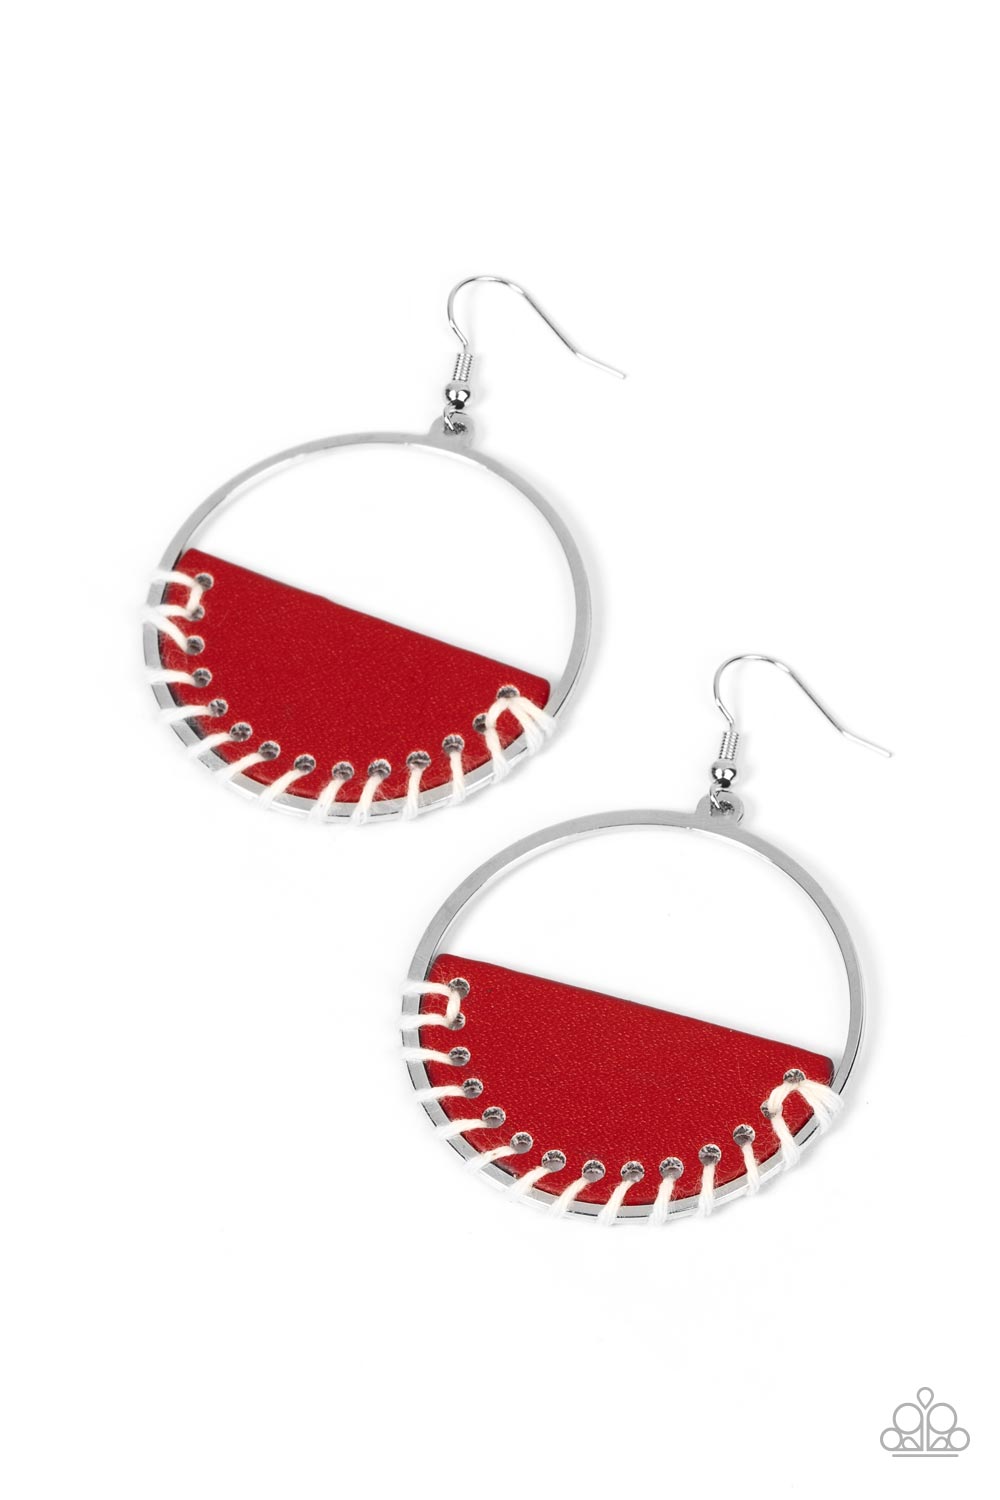 Lavishly Laid Back Red Earring - Paparazzi Accessories﻿  White cording is threaded through the bottom of a half moon piece of red leather, anchoring the earthy accent in place inside a glistening silver hoop for an earthy flair. Earring attaches to a standard fishhook fitting.  Sold as one pair of earrings.